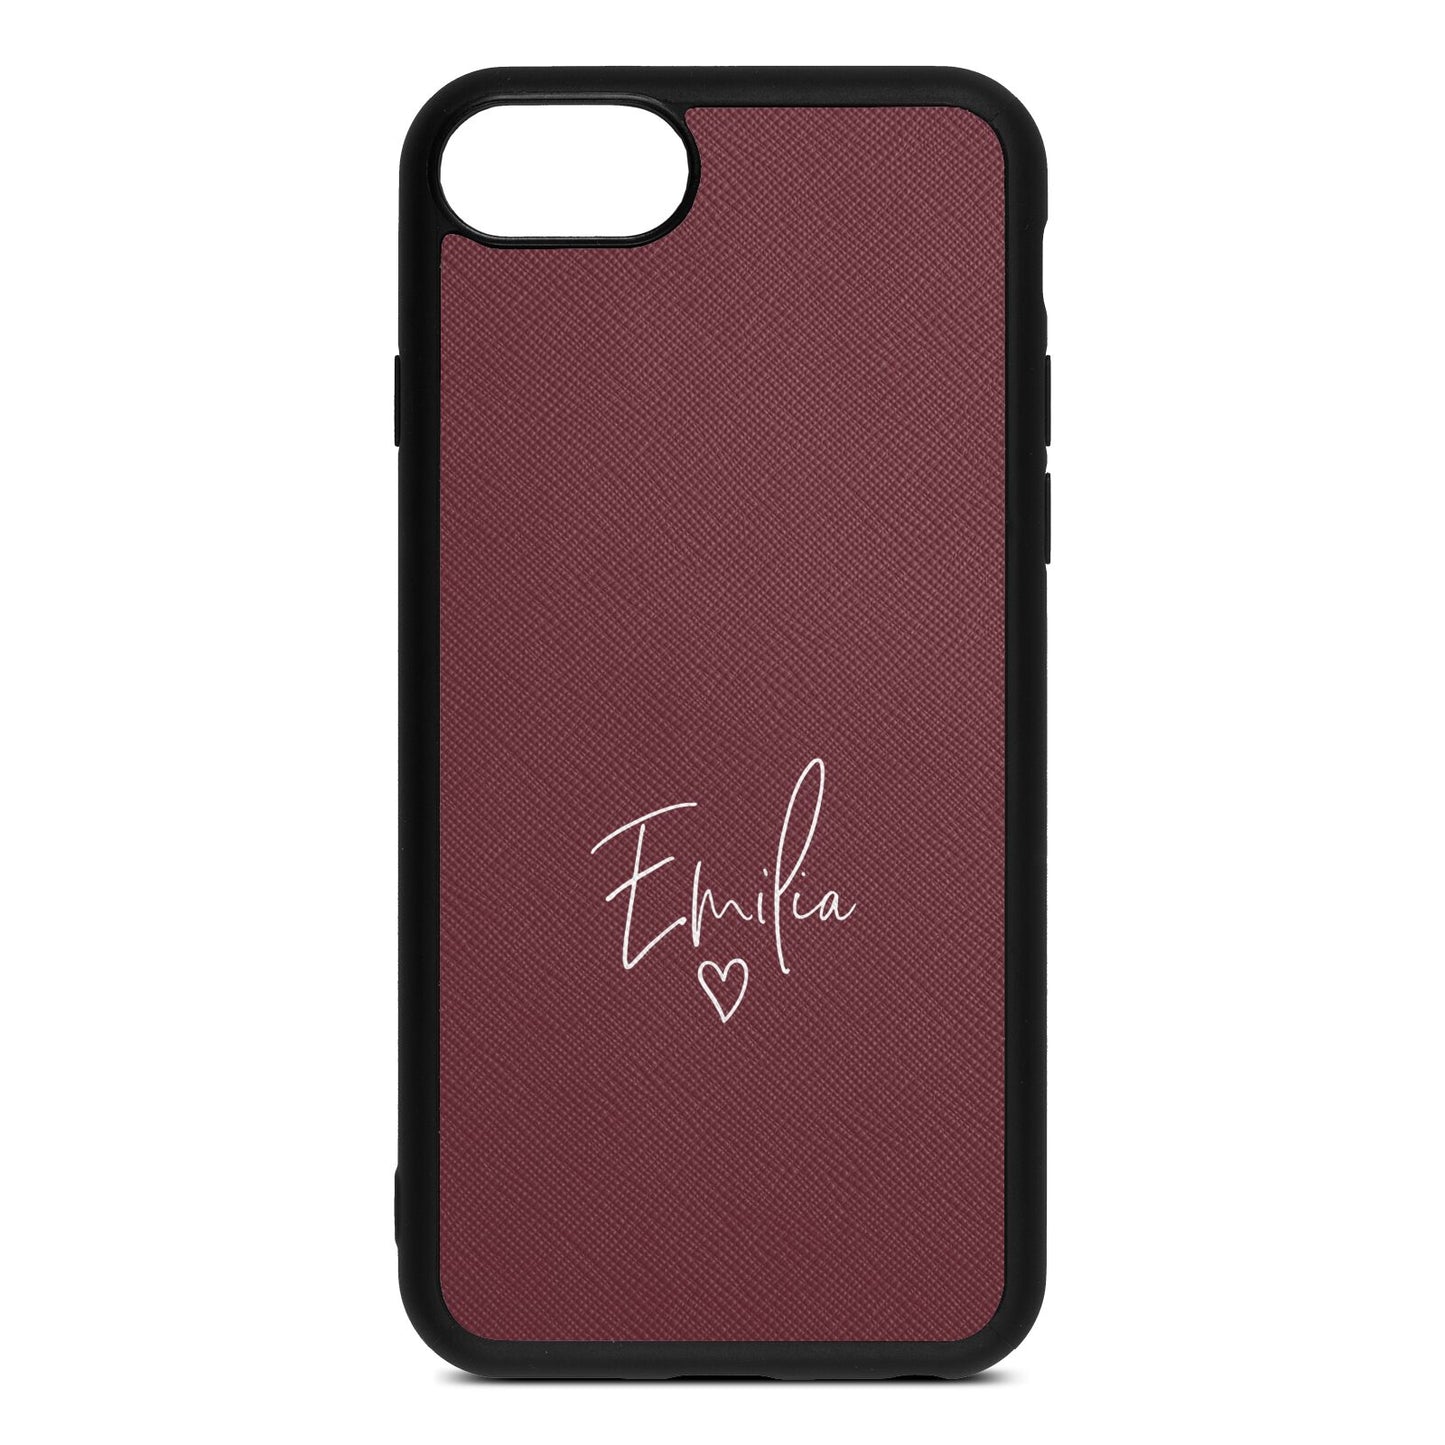 White Handwritten Name Transparent Rose Brown Saffiano Leather iPhone 8 Case